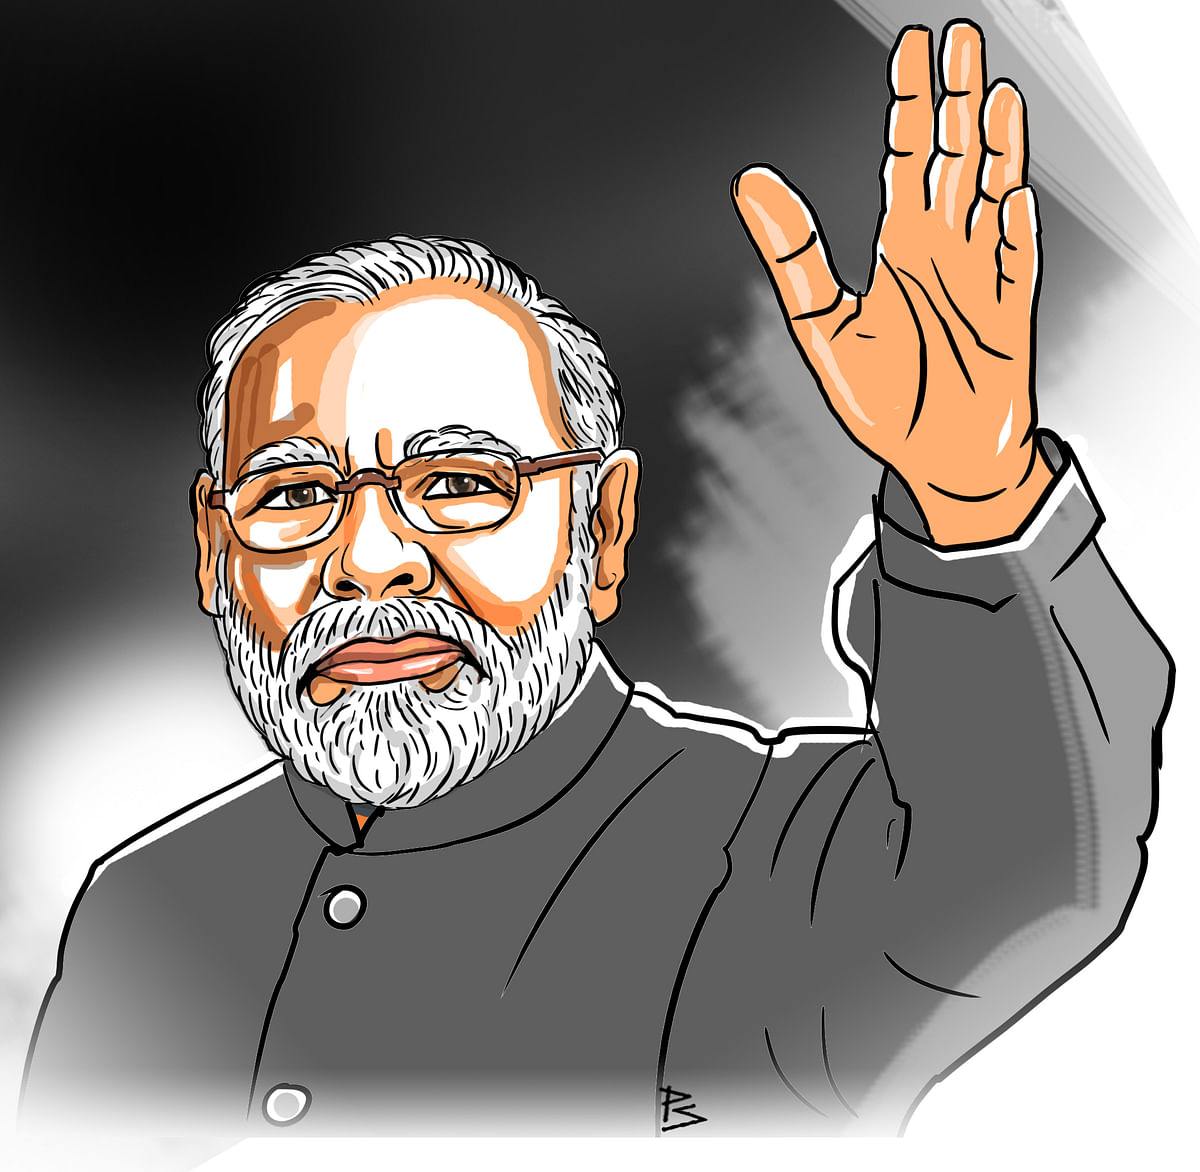 With this win, NaMo is India's most trusted brand